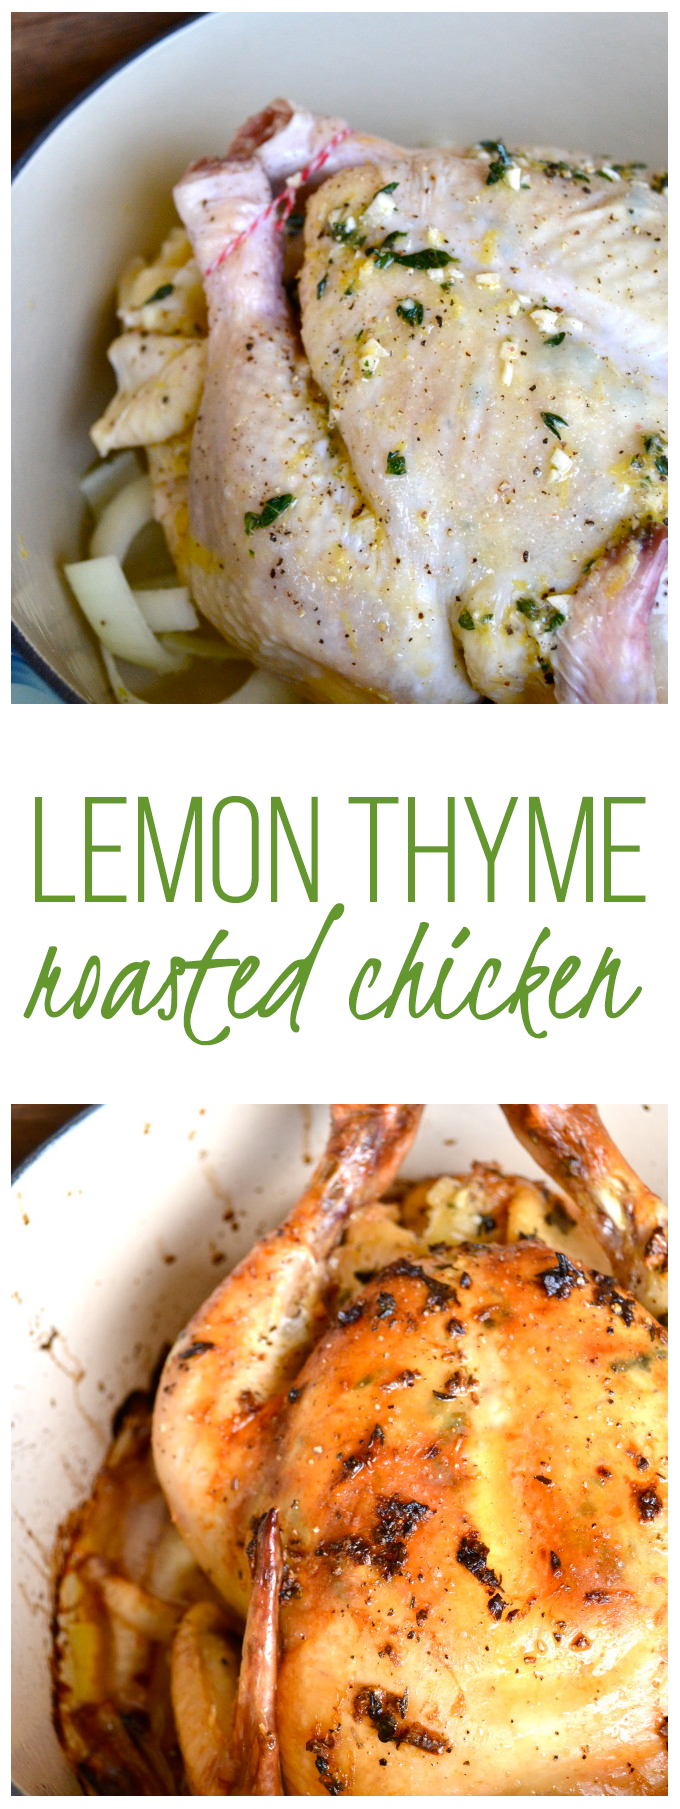 The best way to meal prep for the week is to roast a chicken! This quick Lemon Thyme Roasted Chicken will fill your fridge with the tastiest chicken for the week! Being healthy can be easy!